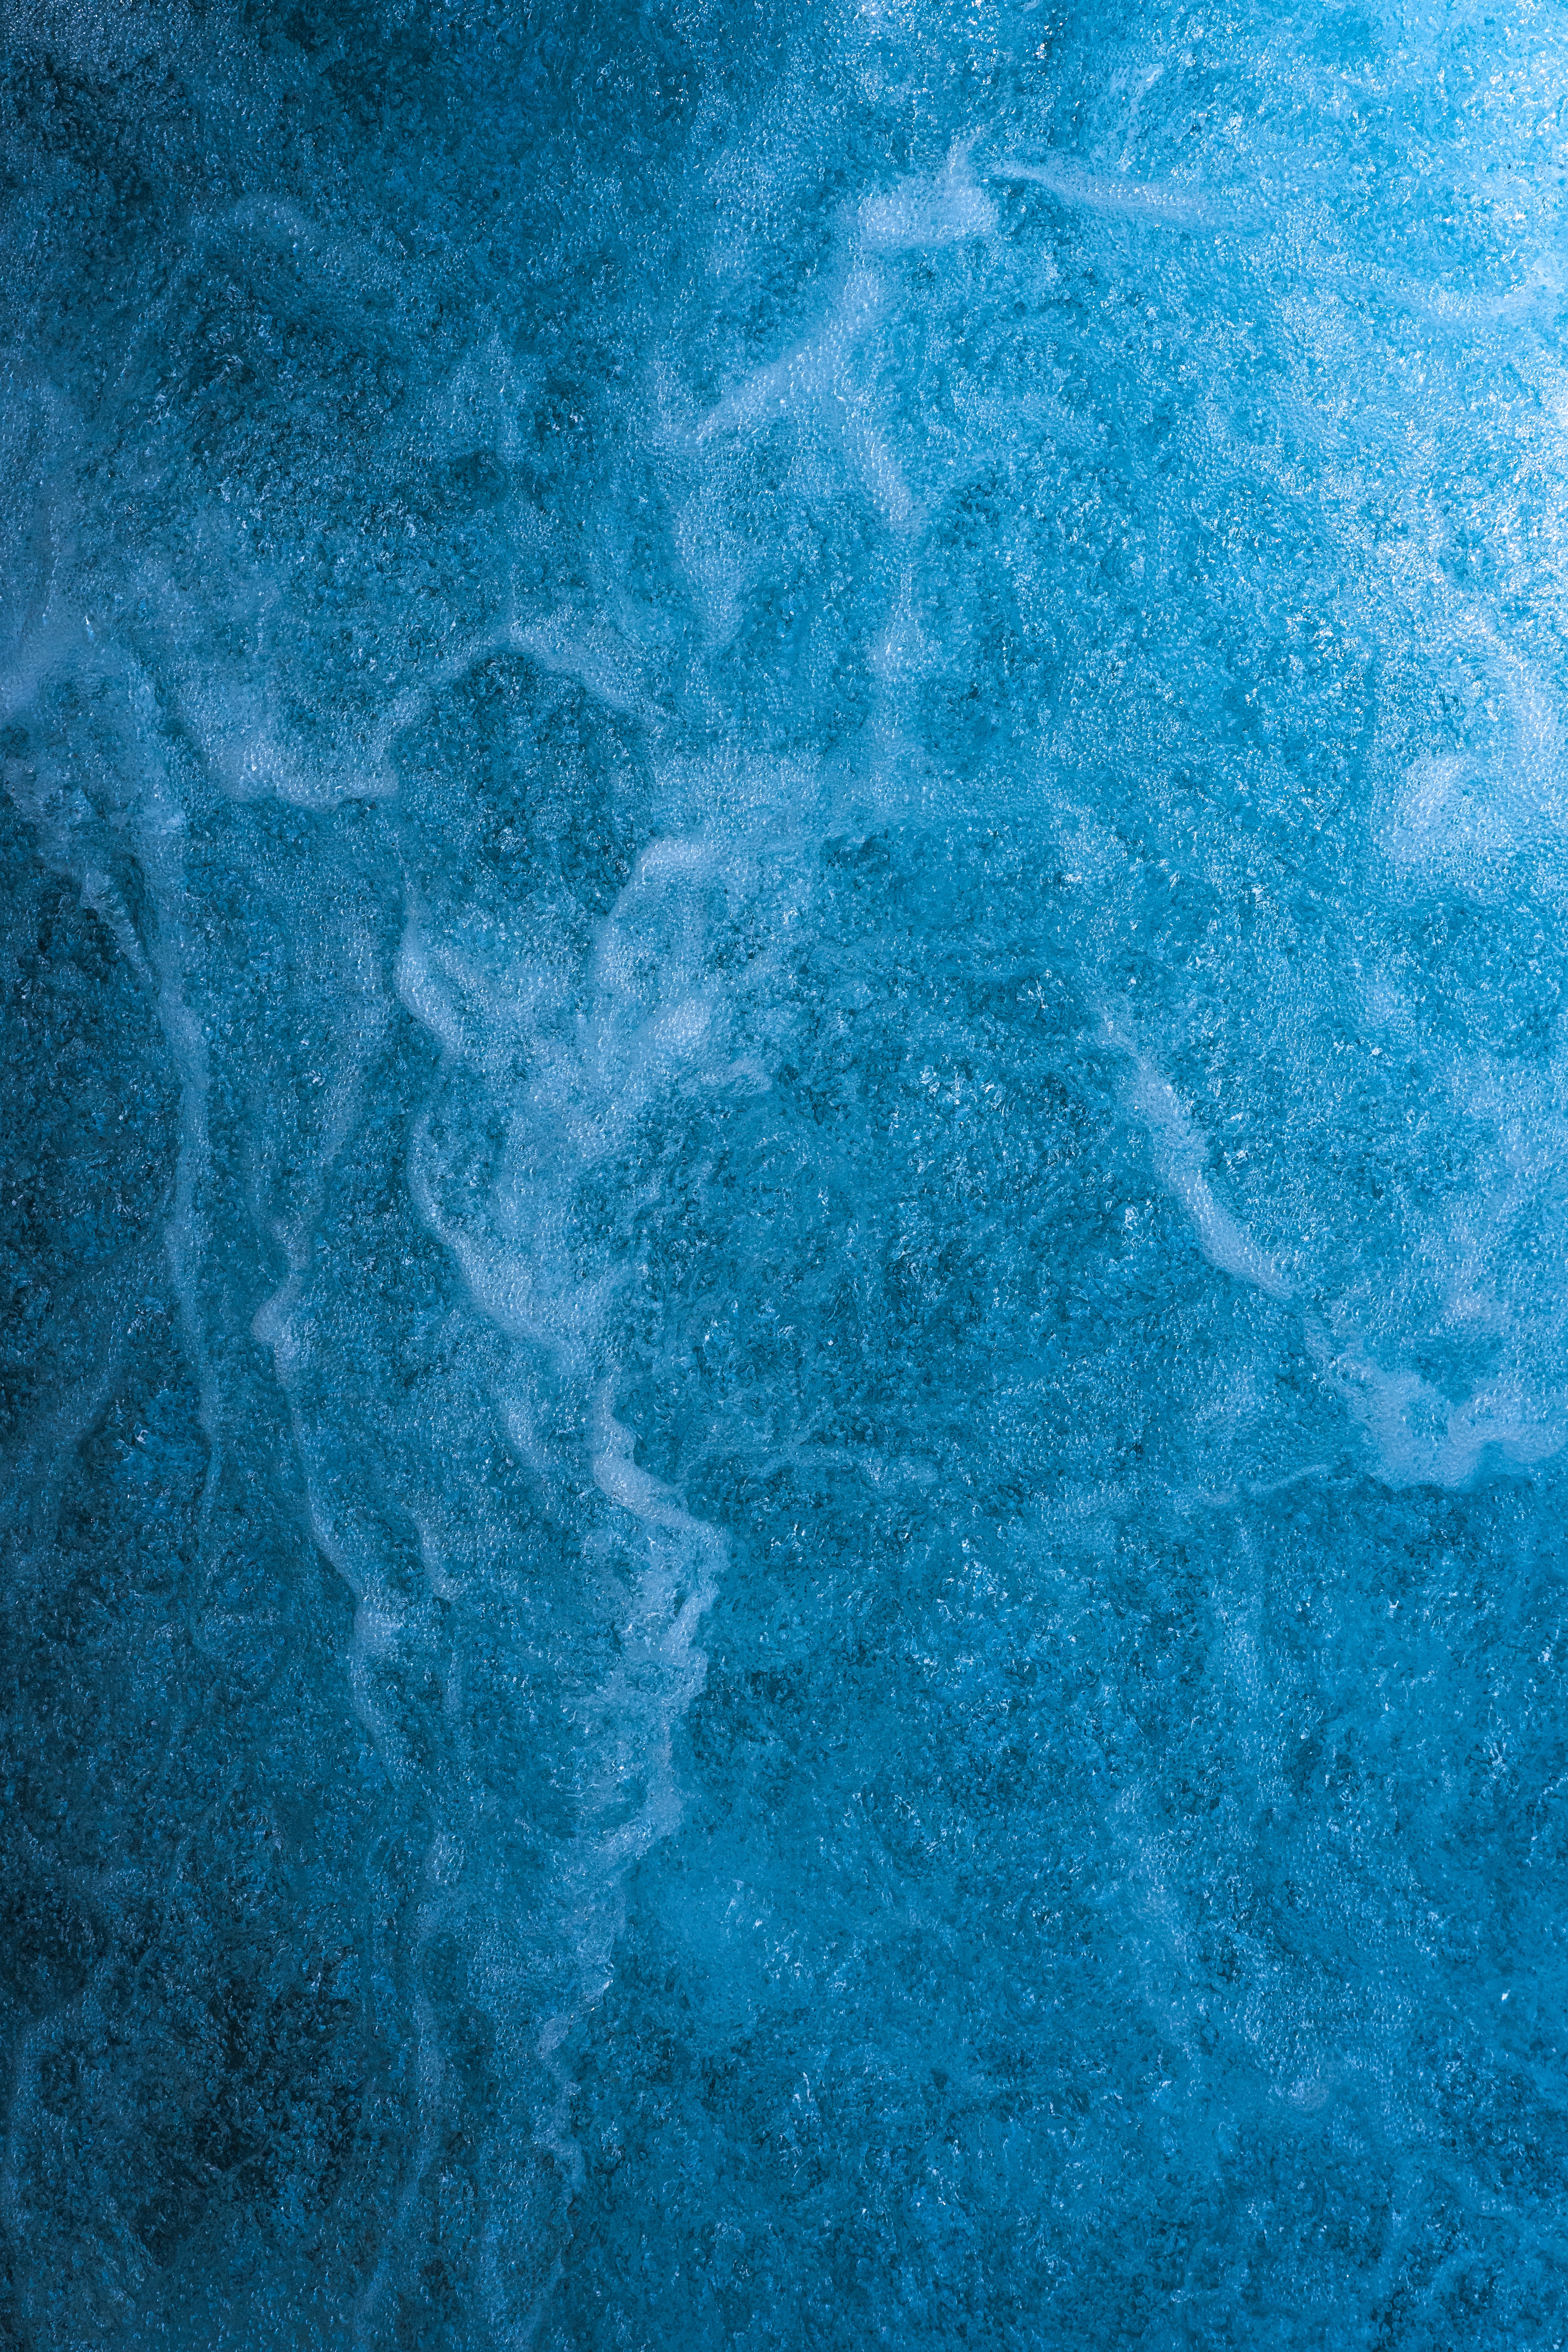 121509 download wallpaper water, waves, blue, texture, textures, liquid screensavers and pictures for free